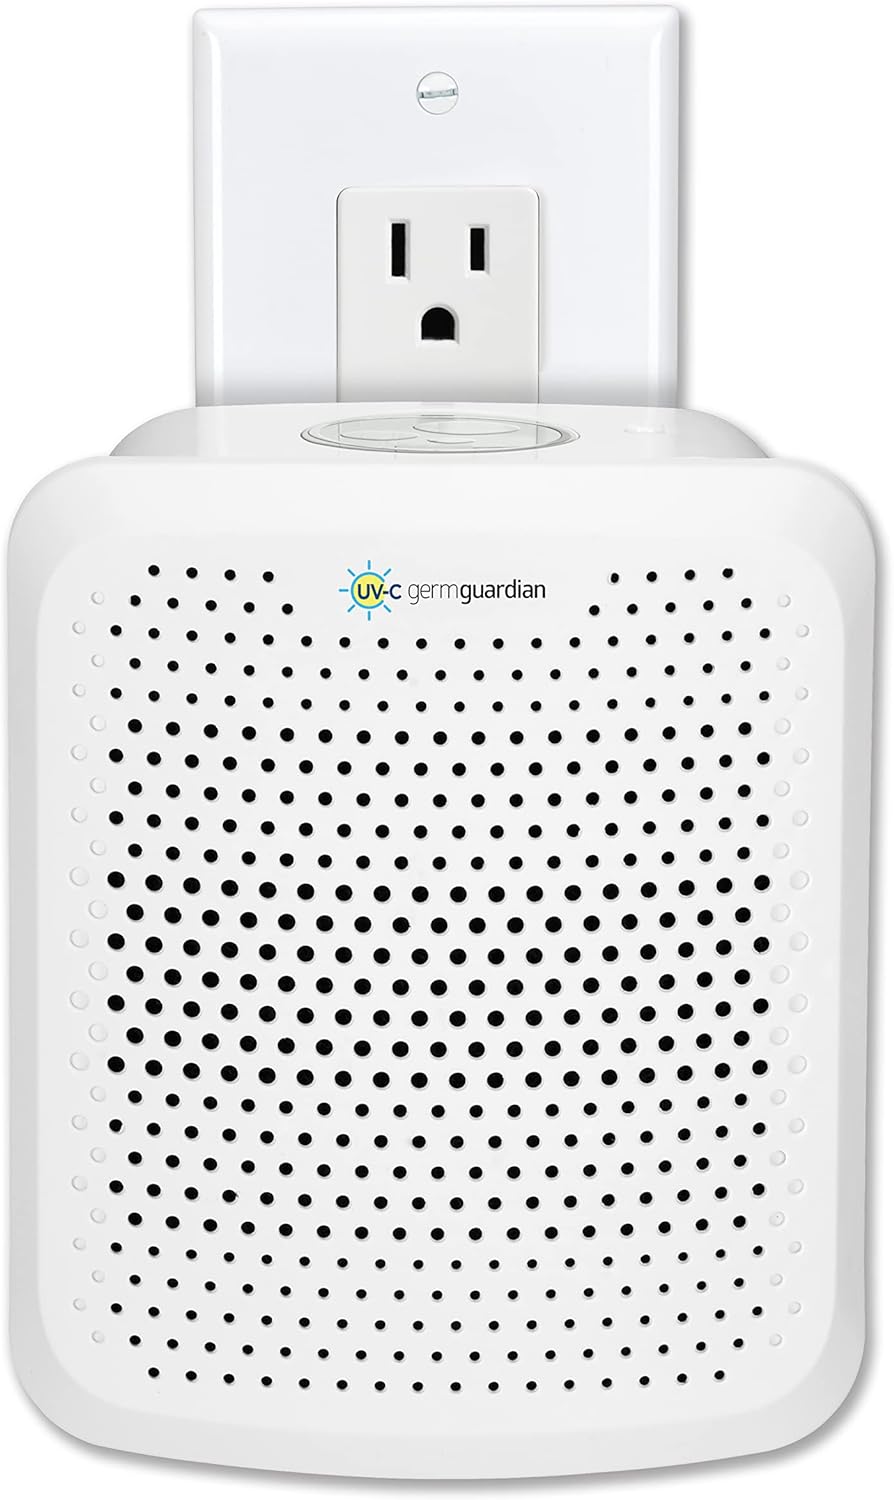 GermGuardian AC225W Pluggable Air Purifier with UV-C Light and Nightlight, Reduces Airborne Mold and Germs, Odor-Eliminating Aromatherapy Essential Oil Pad Included, 7-in Pluggable Air Purifier, White